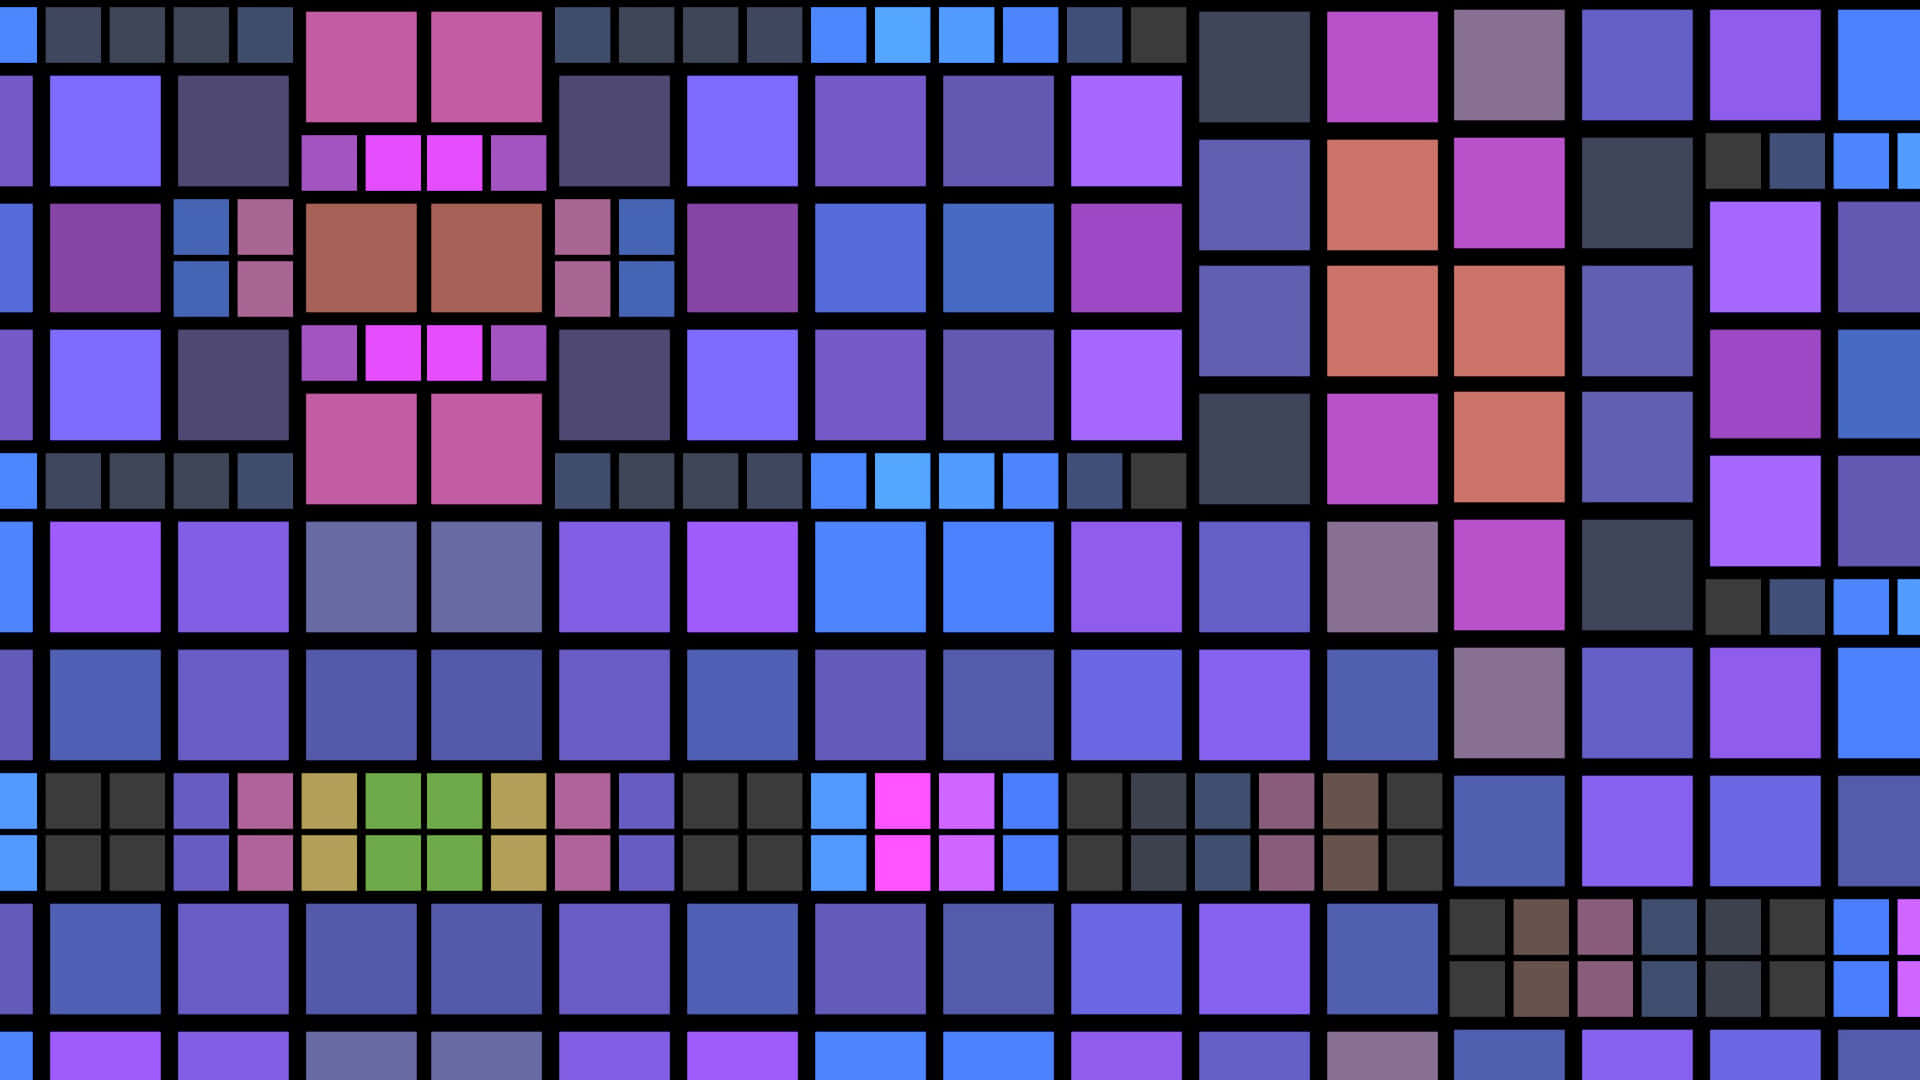 Abstract Diversity in Square Pattern